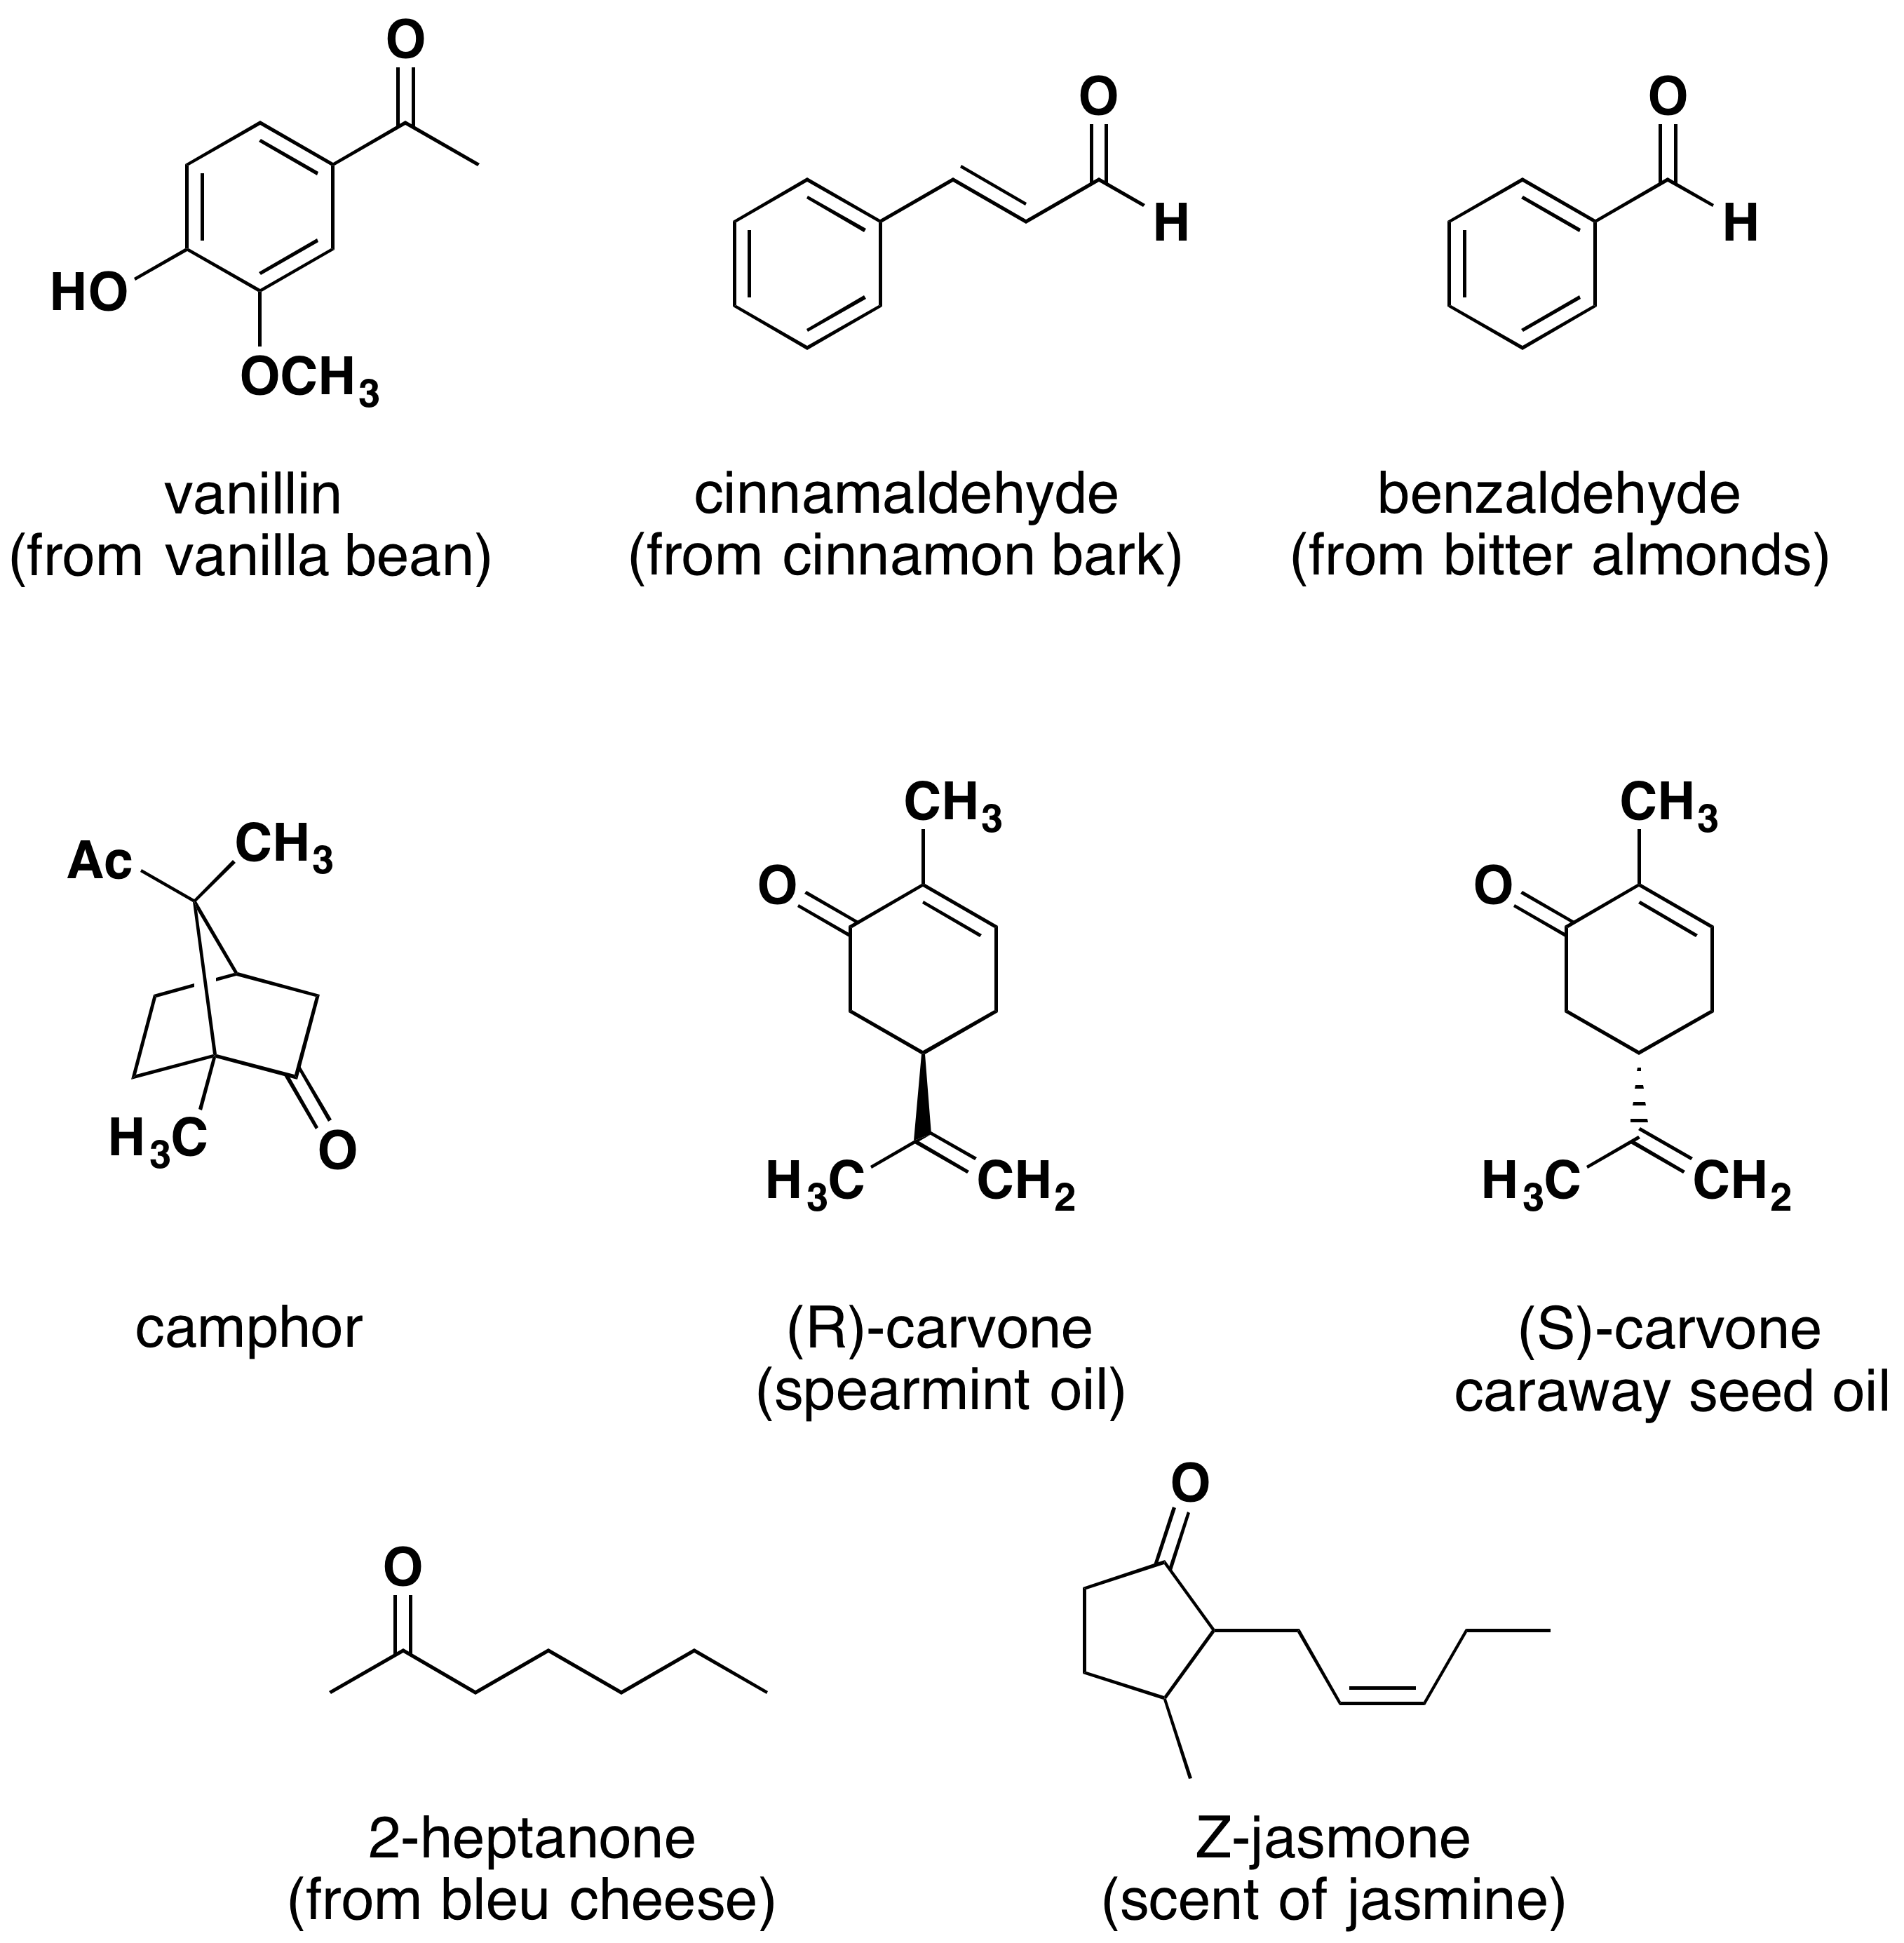 Chemical structures of vanillin (from vanilla bean), cinnamaldehyde (from cinnamon bark), benzaldehyde (from bitter almonds), camphor, (R)-carvone (spearmint oil), (S)-carvone (caraway seed oil), 2-heptanone (from bleu cheese), and Z-jasmone (scent of jasmine).